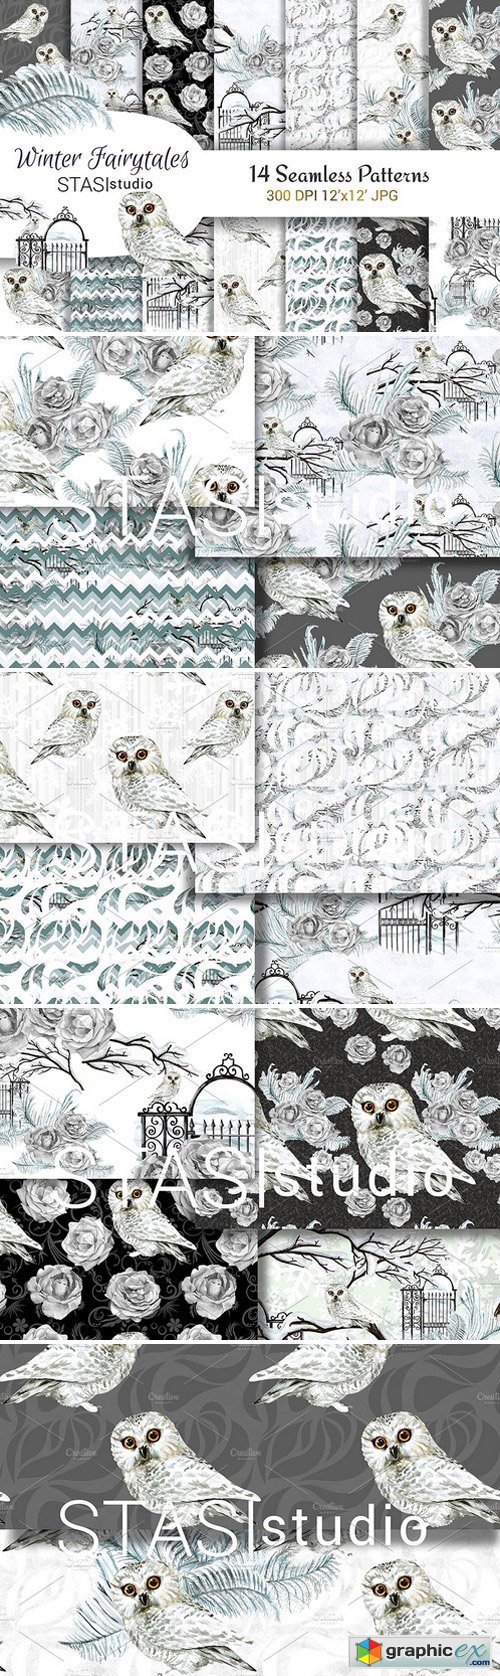 Watercolor White Owl Paper Pack